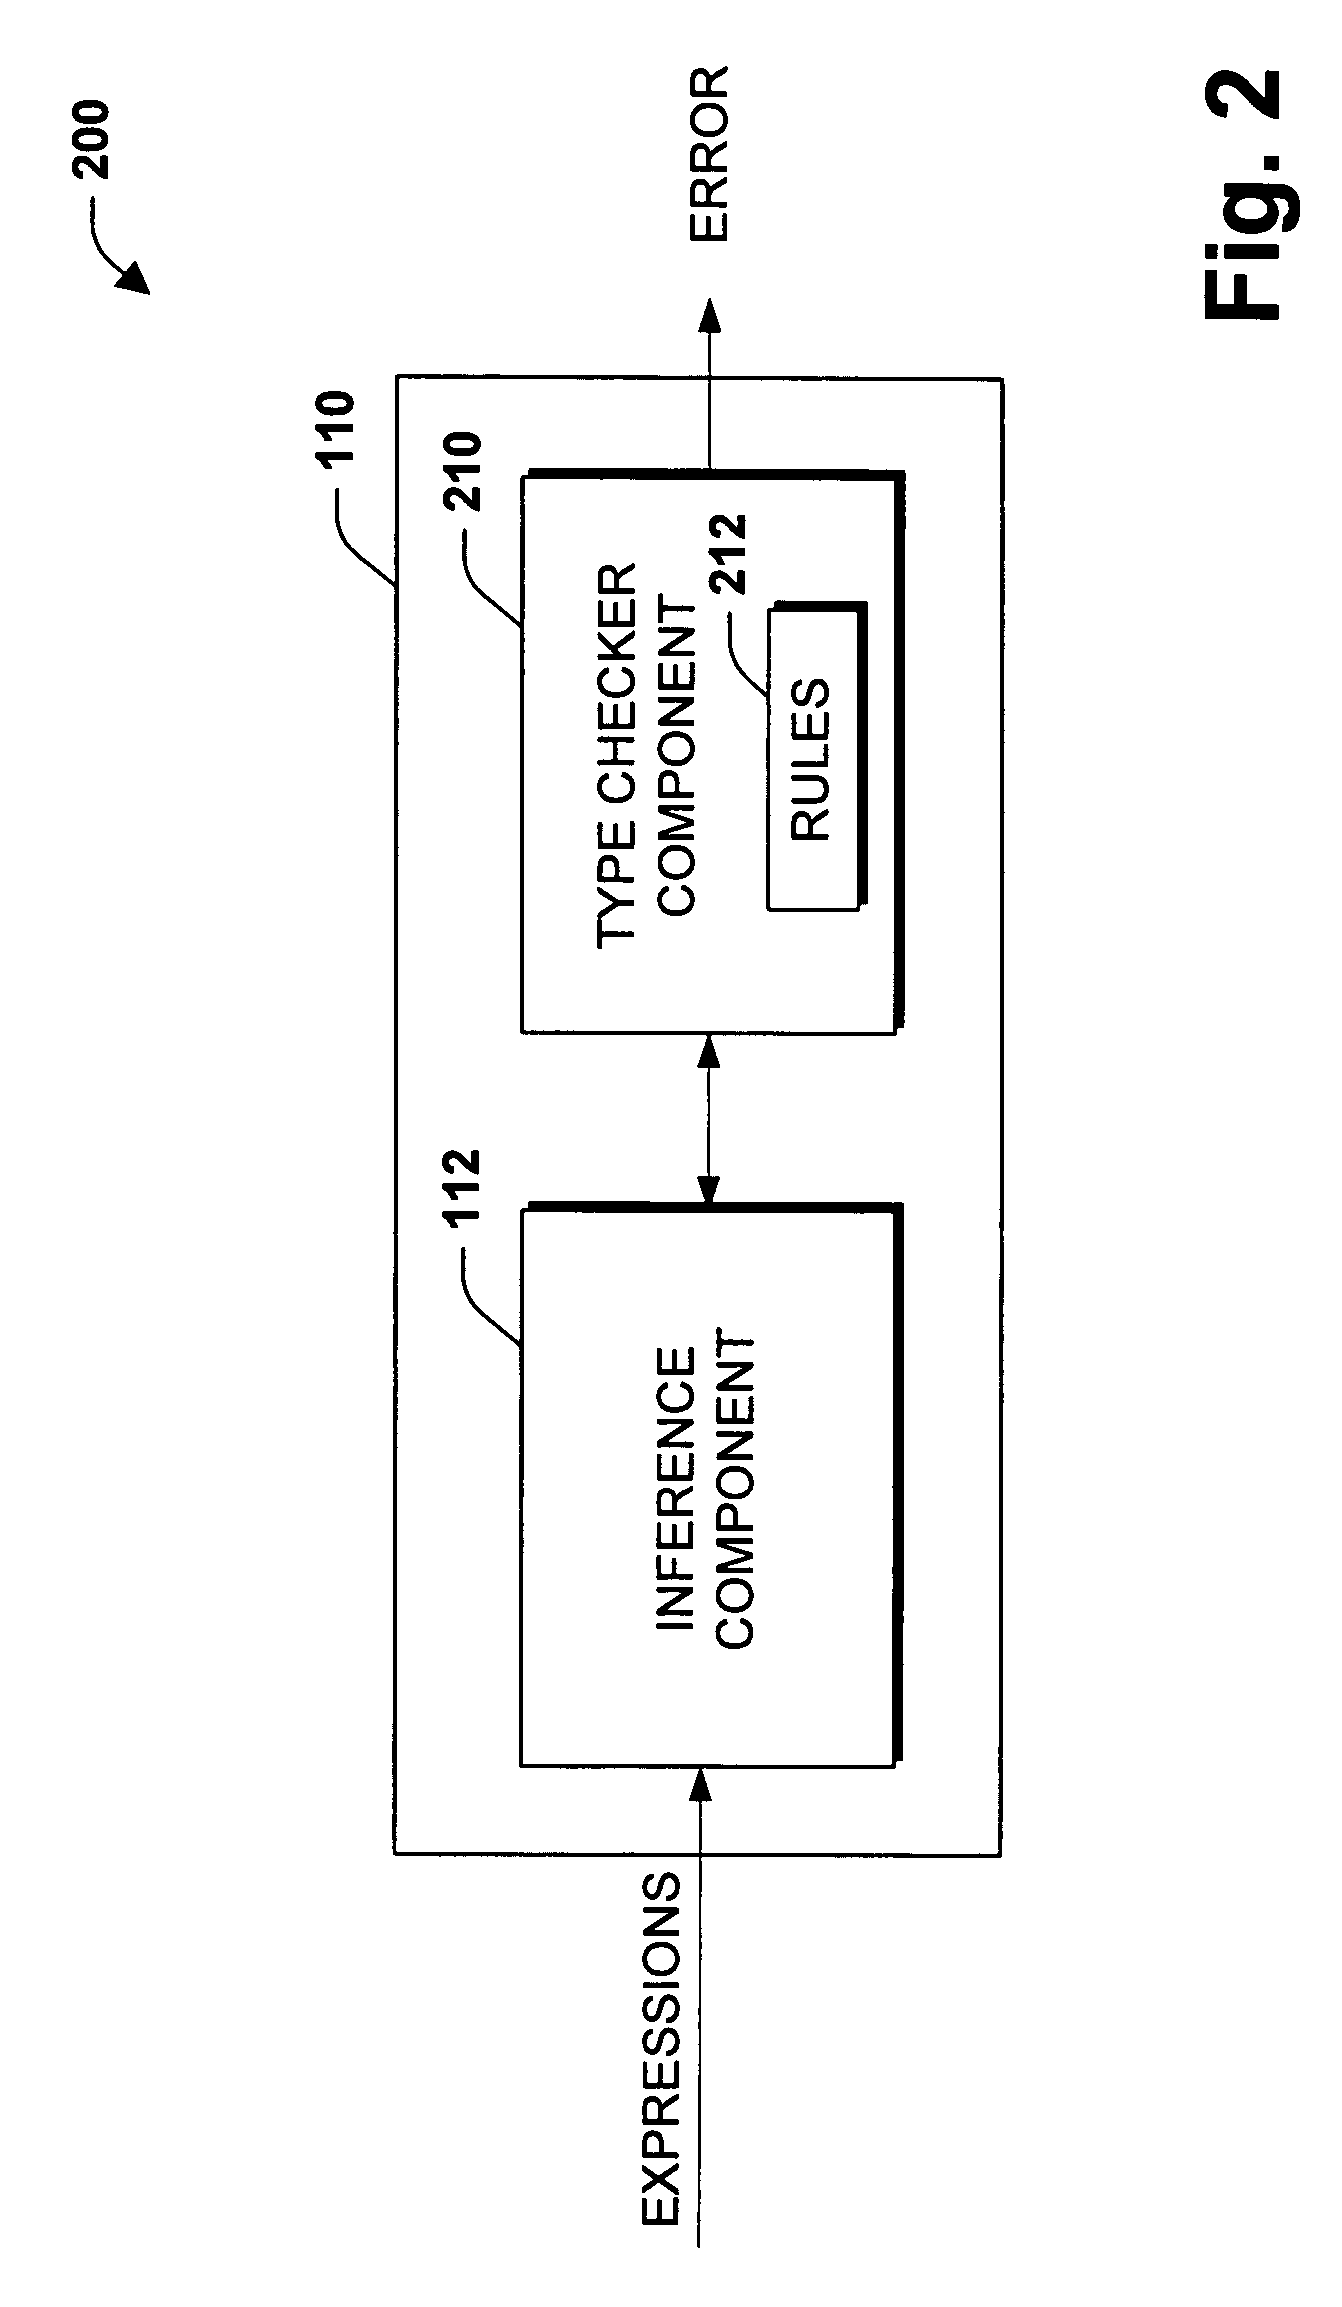 Local type alias inference system and method